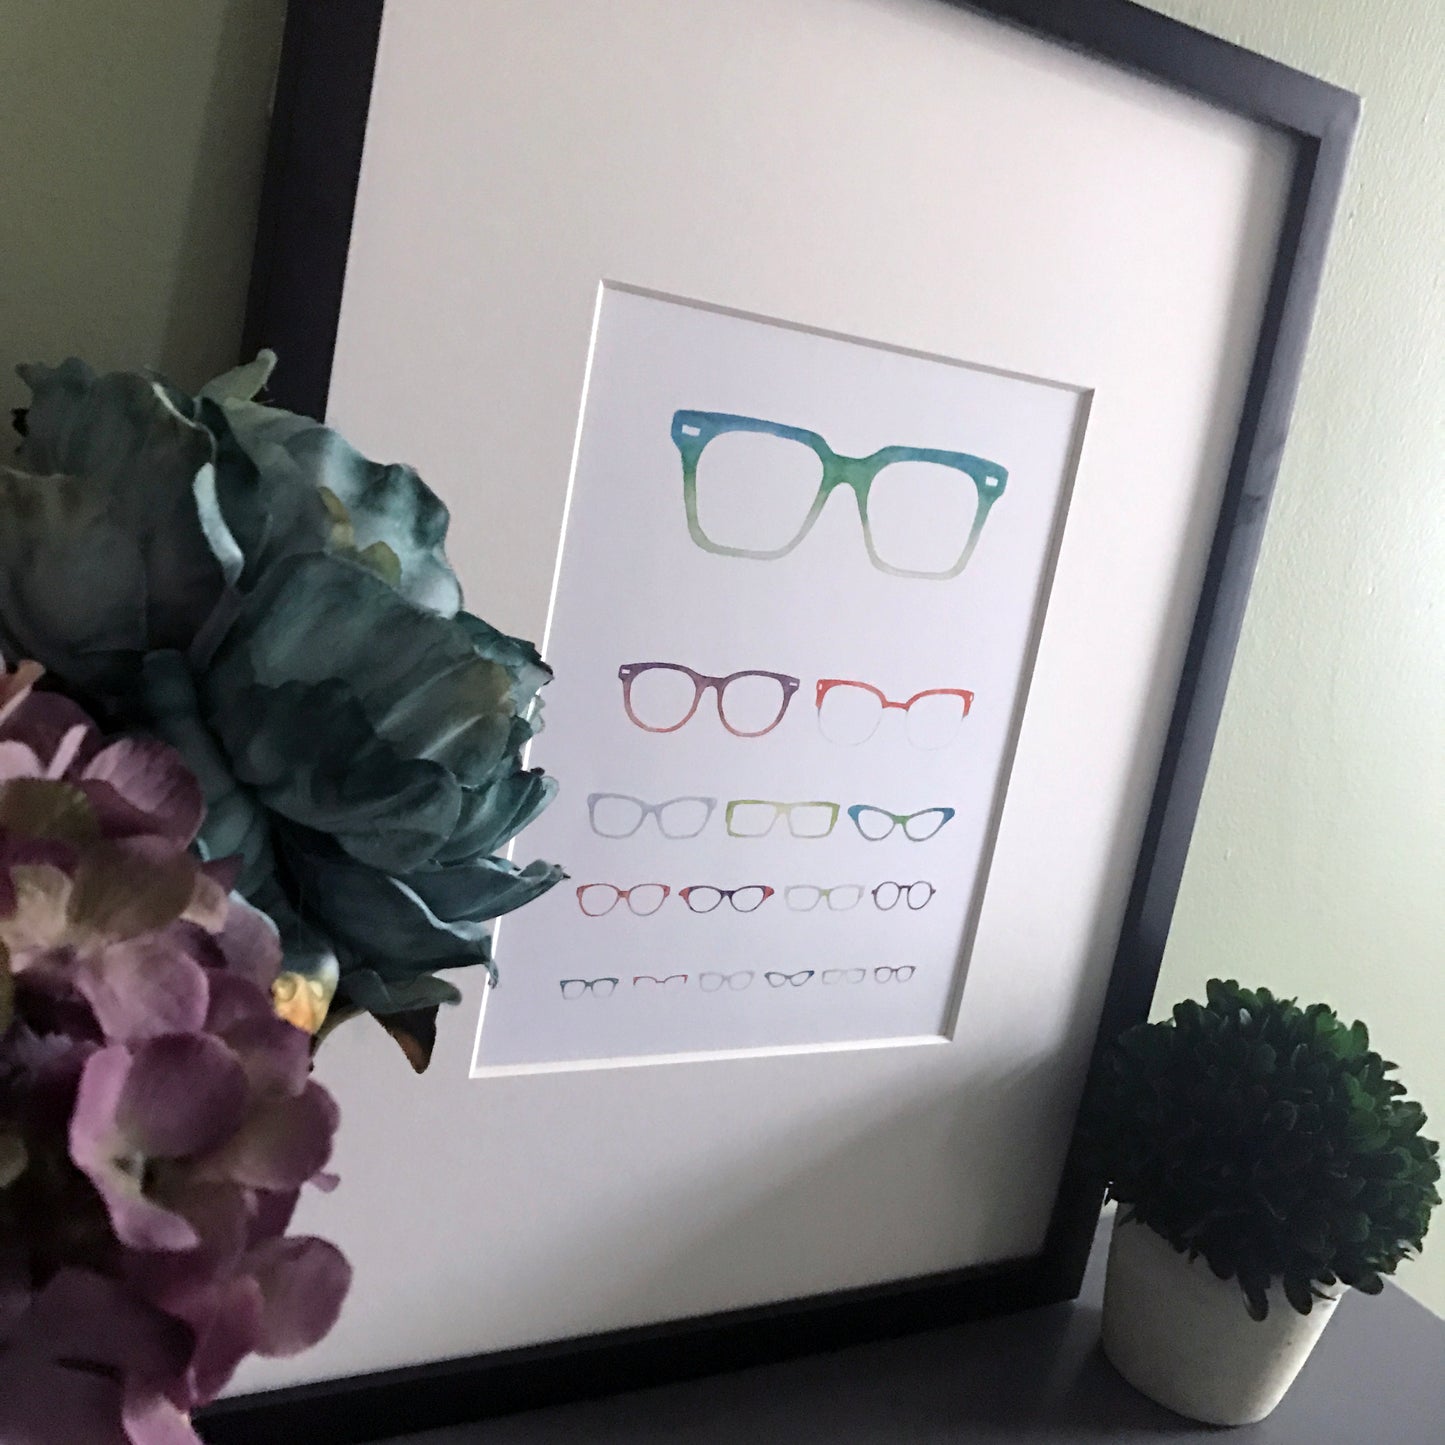 A print of an eye chart made up of varying sizes and styles of glasses. Shown displayed in a black frame.